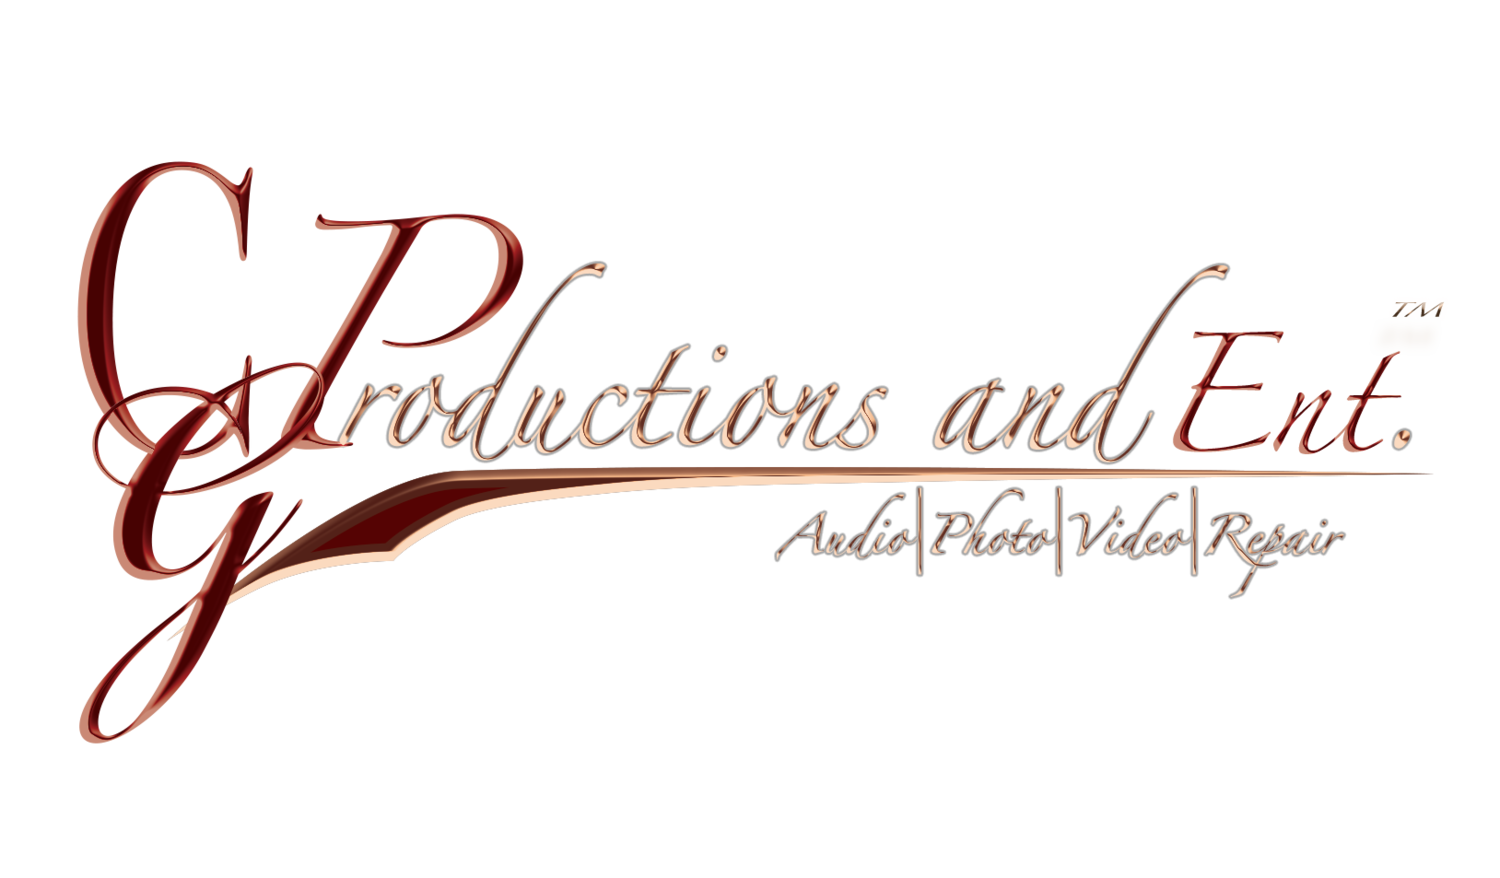 C.G. Productions and Entertainment